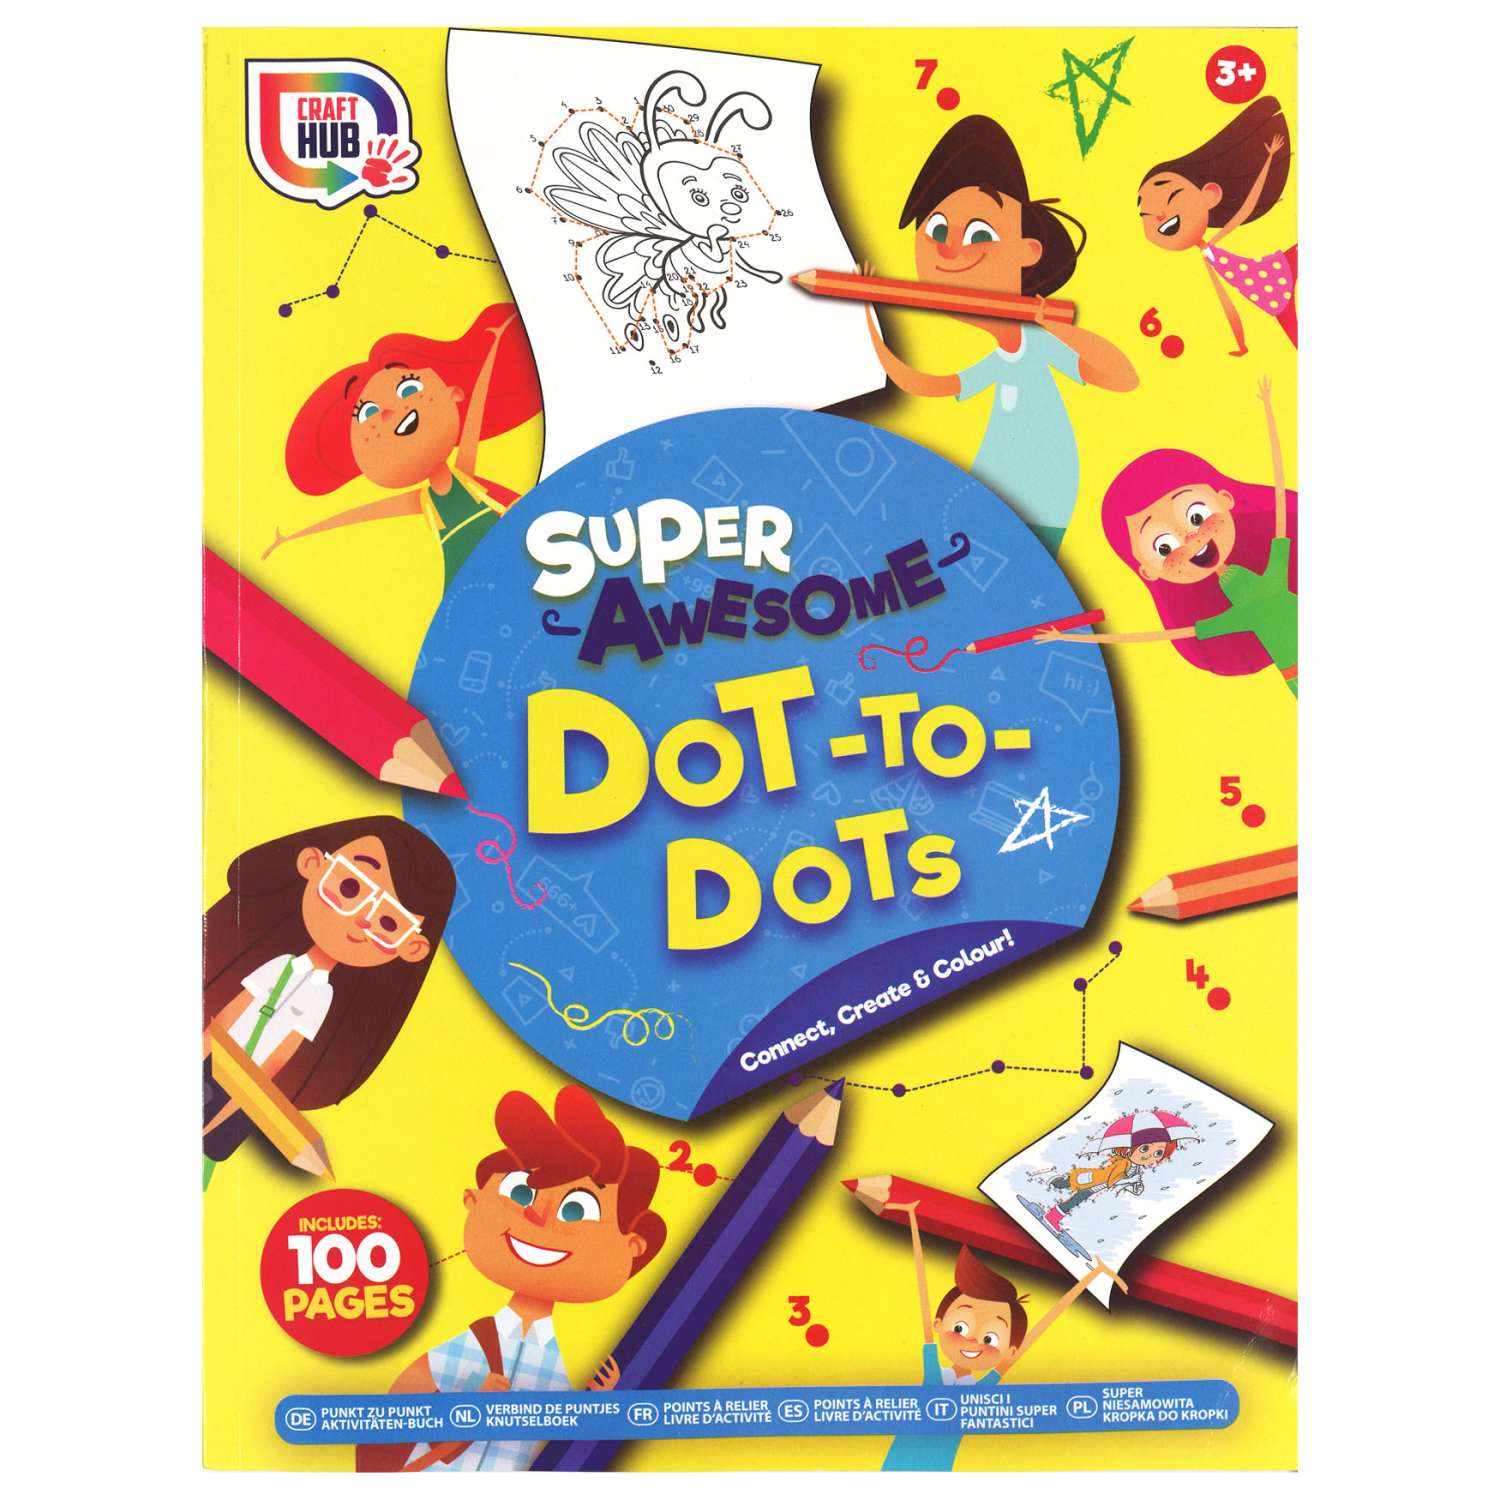 wholesale-kids-super-awesome-dot-to-dot-book-a4-50-sheets-homeware